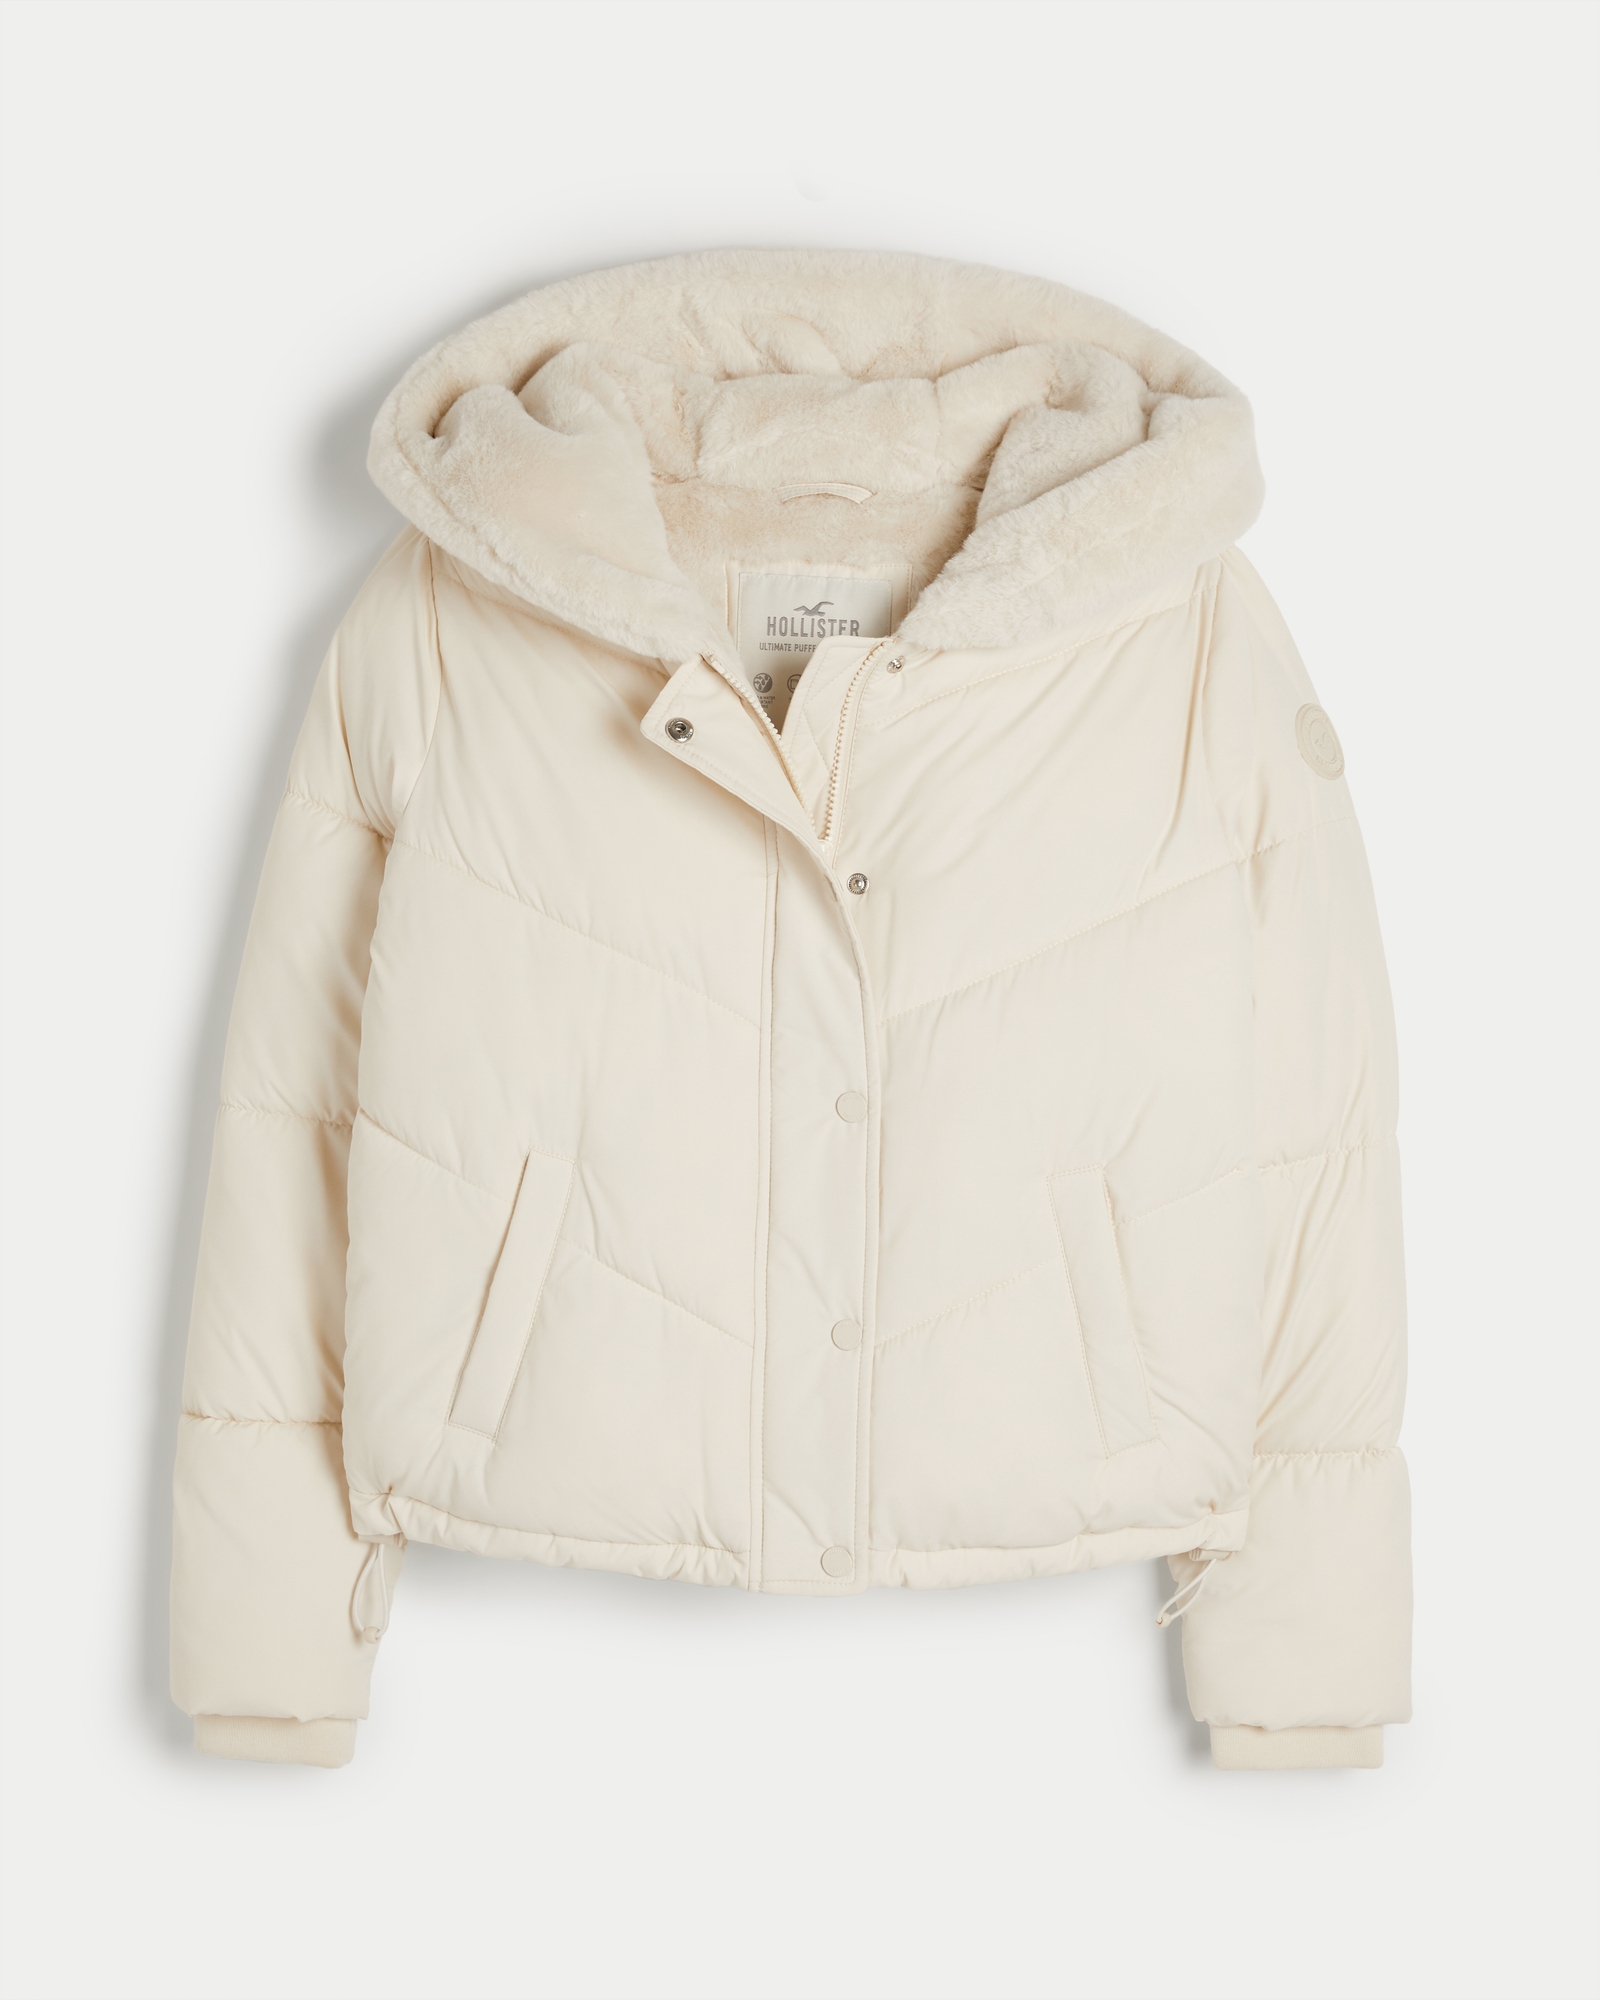 https://img.hollisterco.com/is/image/anf/KIC_344-3601-0005-178_prod2.jpg?policy=product-extra-large